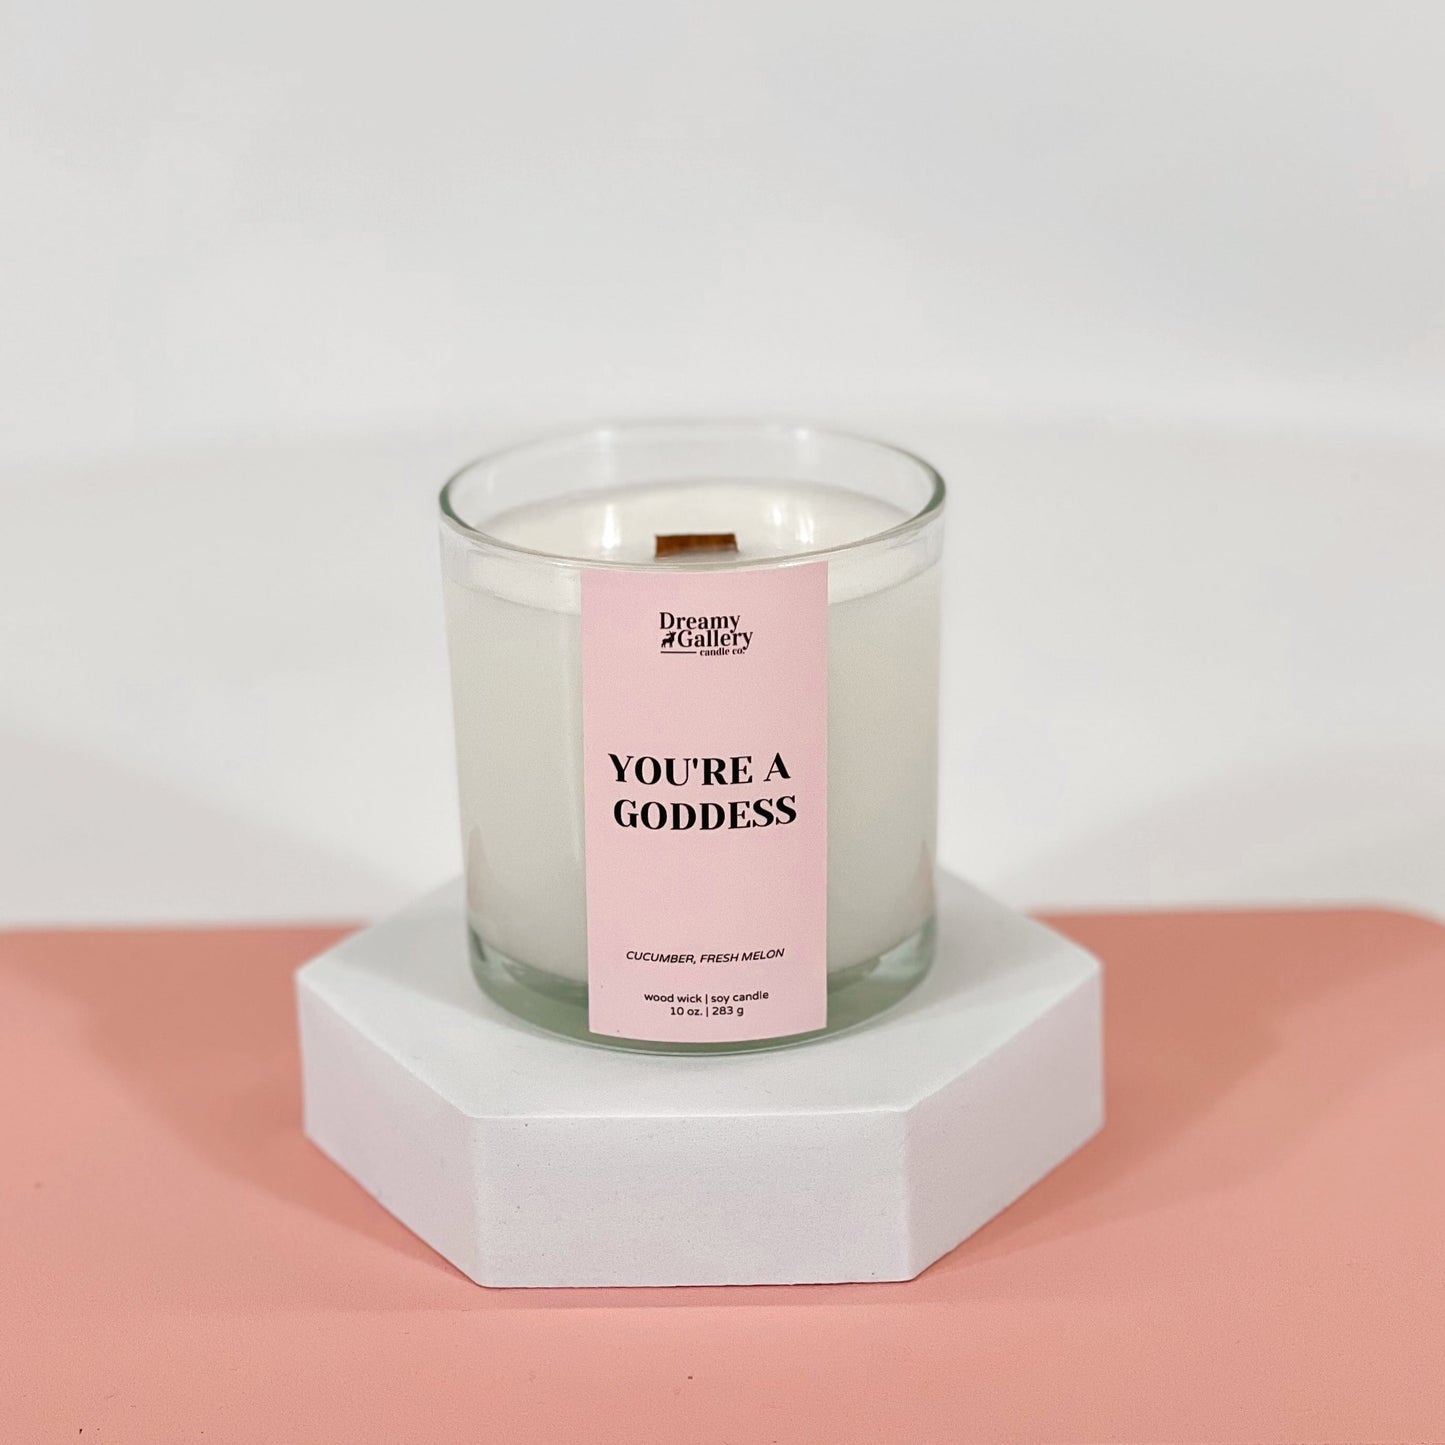 YOU’RE A GODDESS- WOOD WICK CANDLE